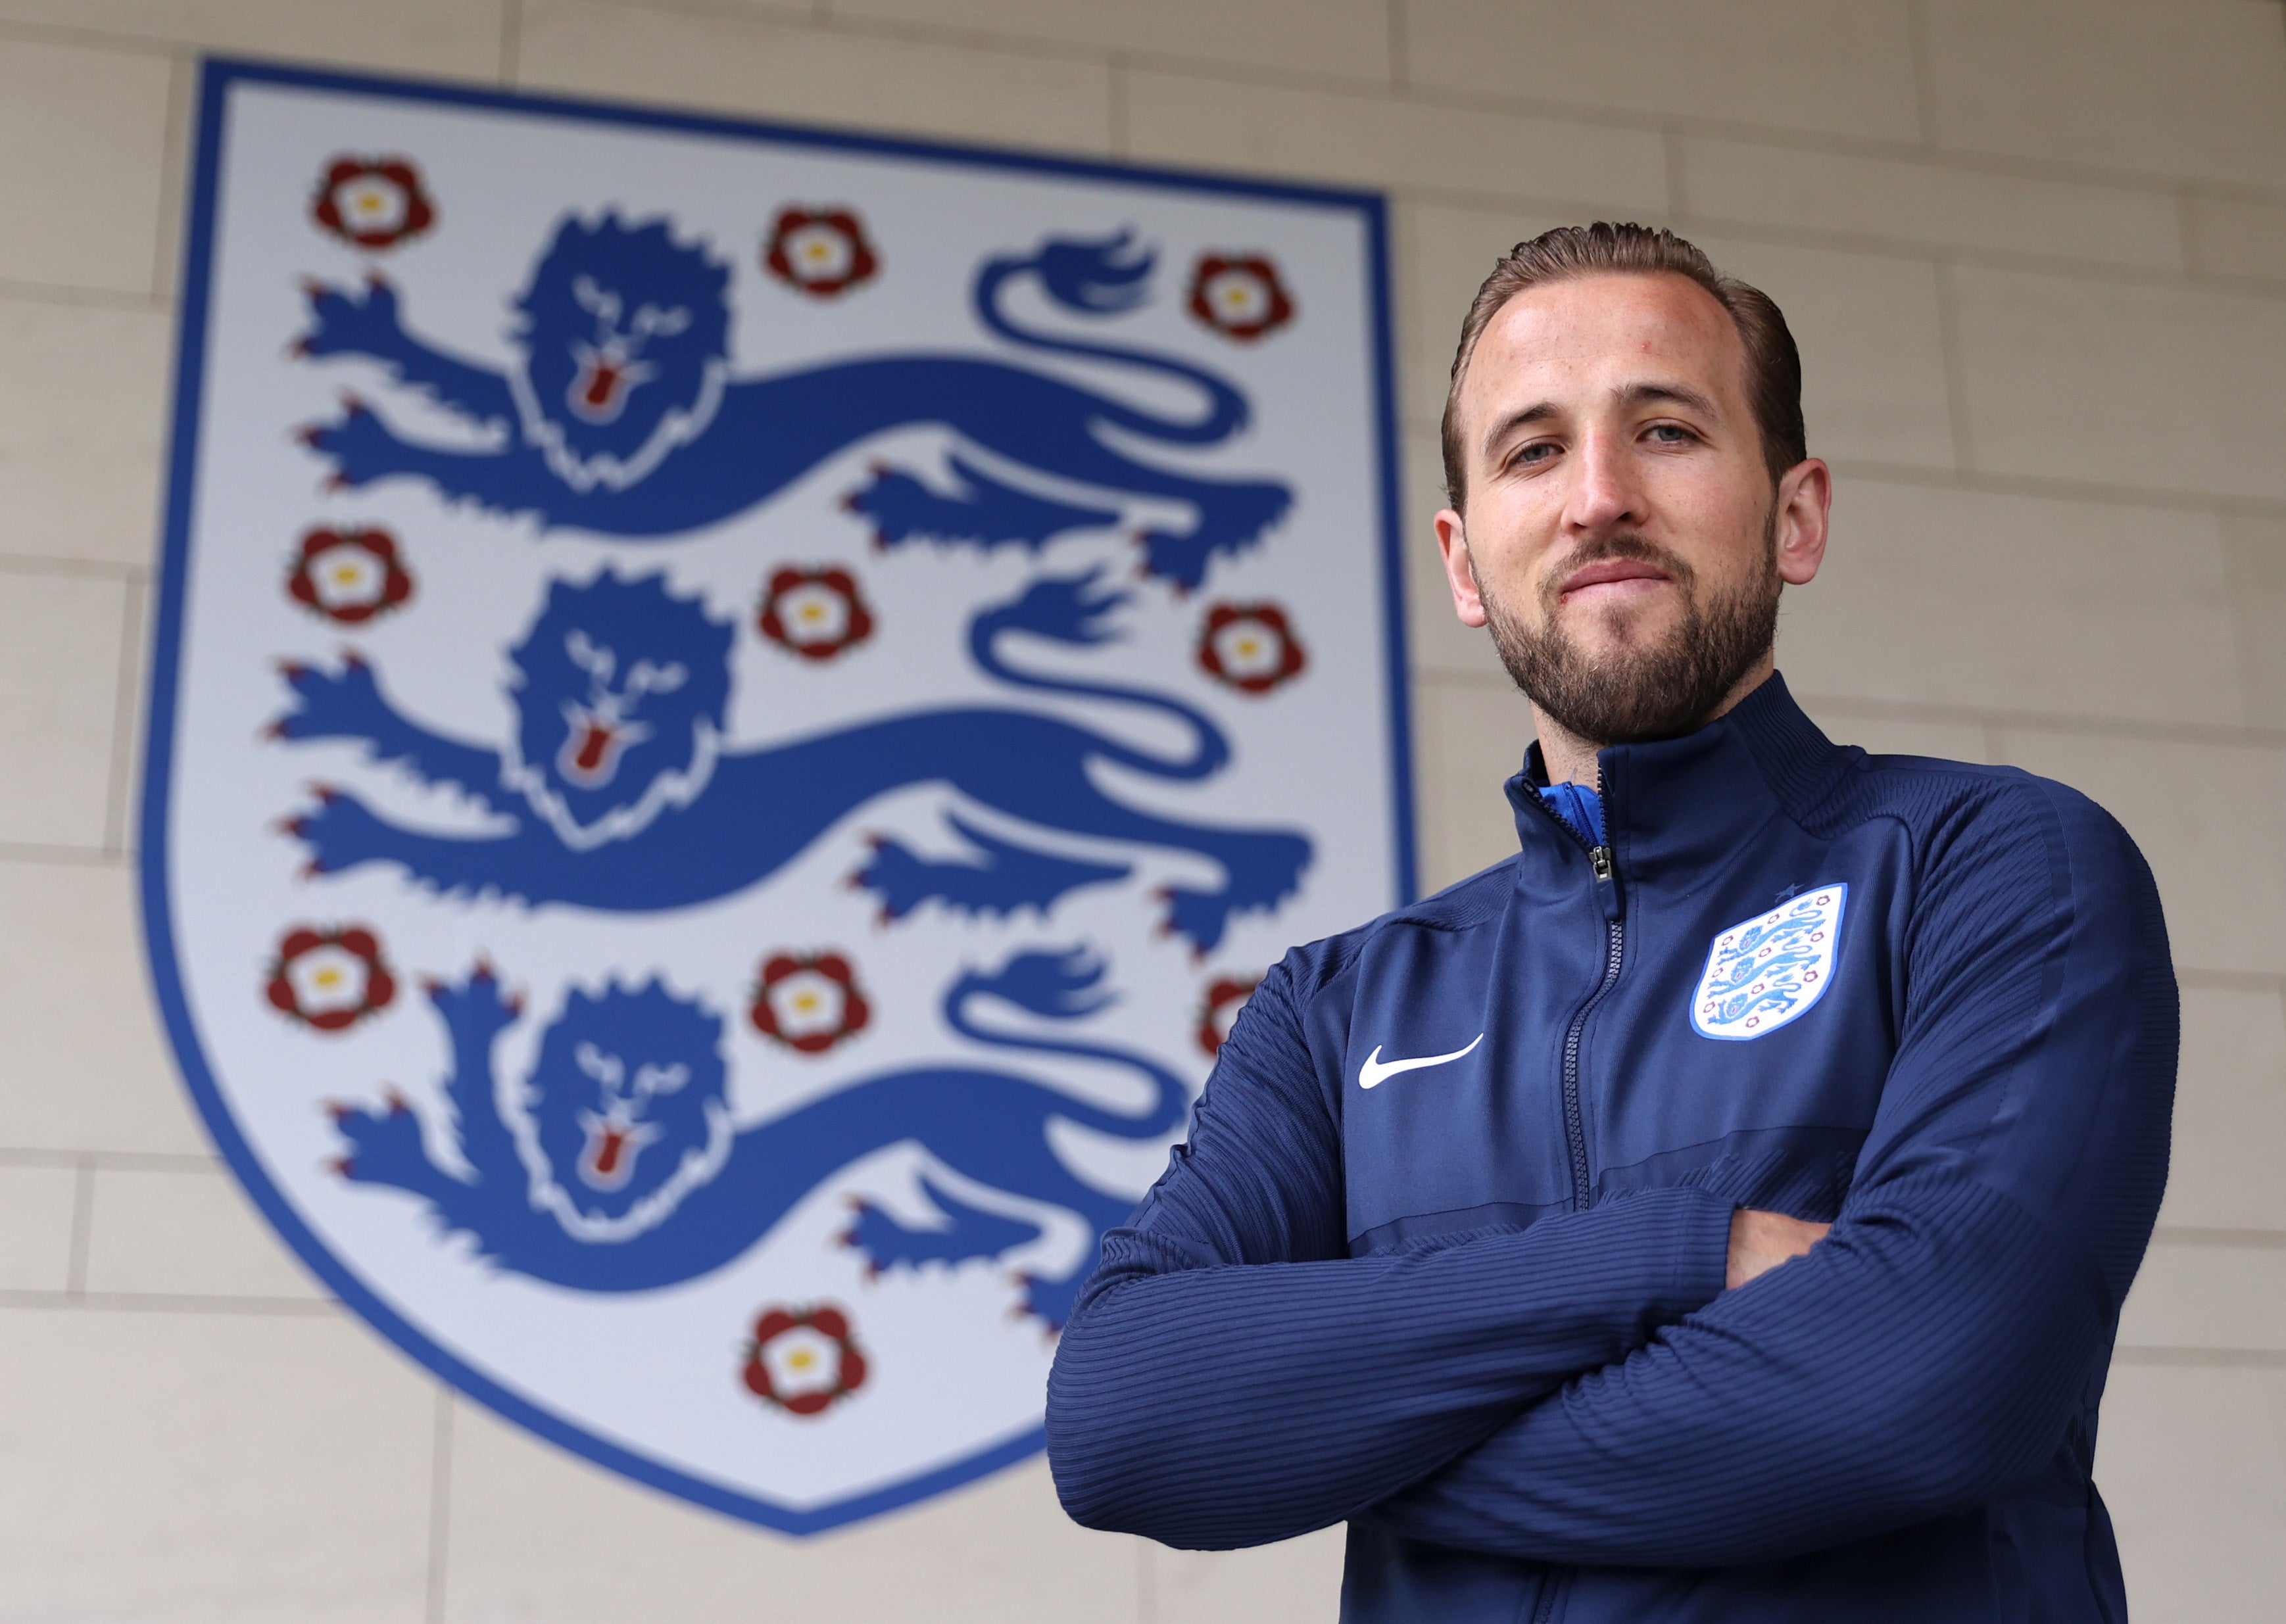 He’s one of our own: the England captain at St George’s Park